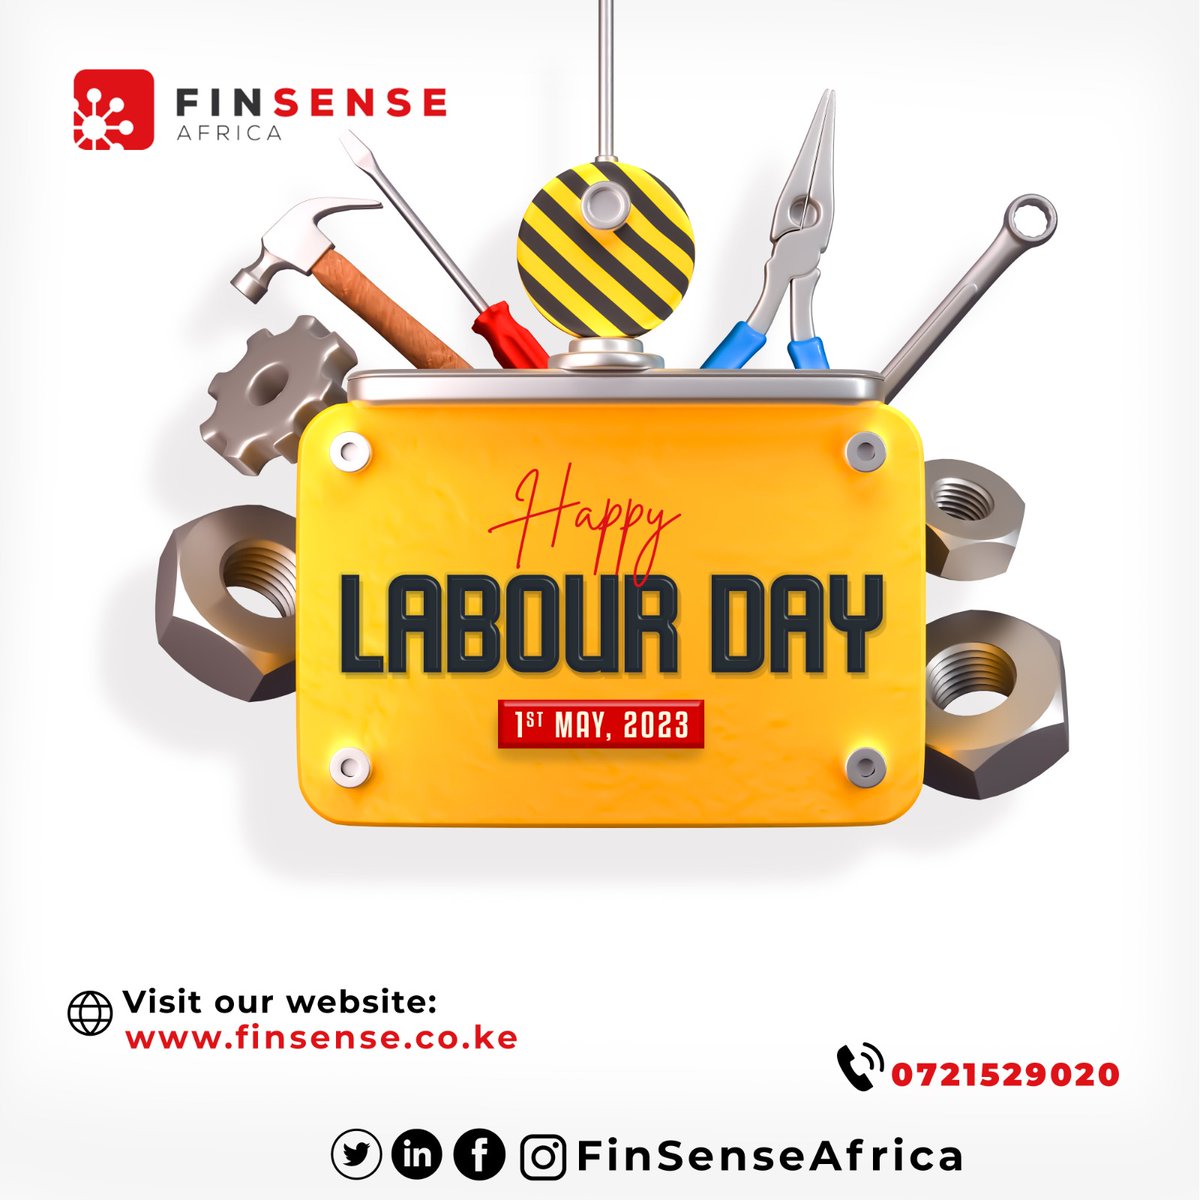 Happy Labour Day! 

Today Finsense Africa celebrates and honours the hardworking individuals who keep our economy and society moving forward. 

From blue-collar labourers to white-collar professionals, we thank you for your dedication and contributions to our communities.